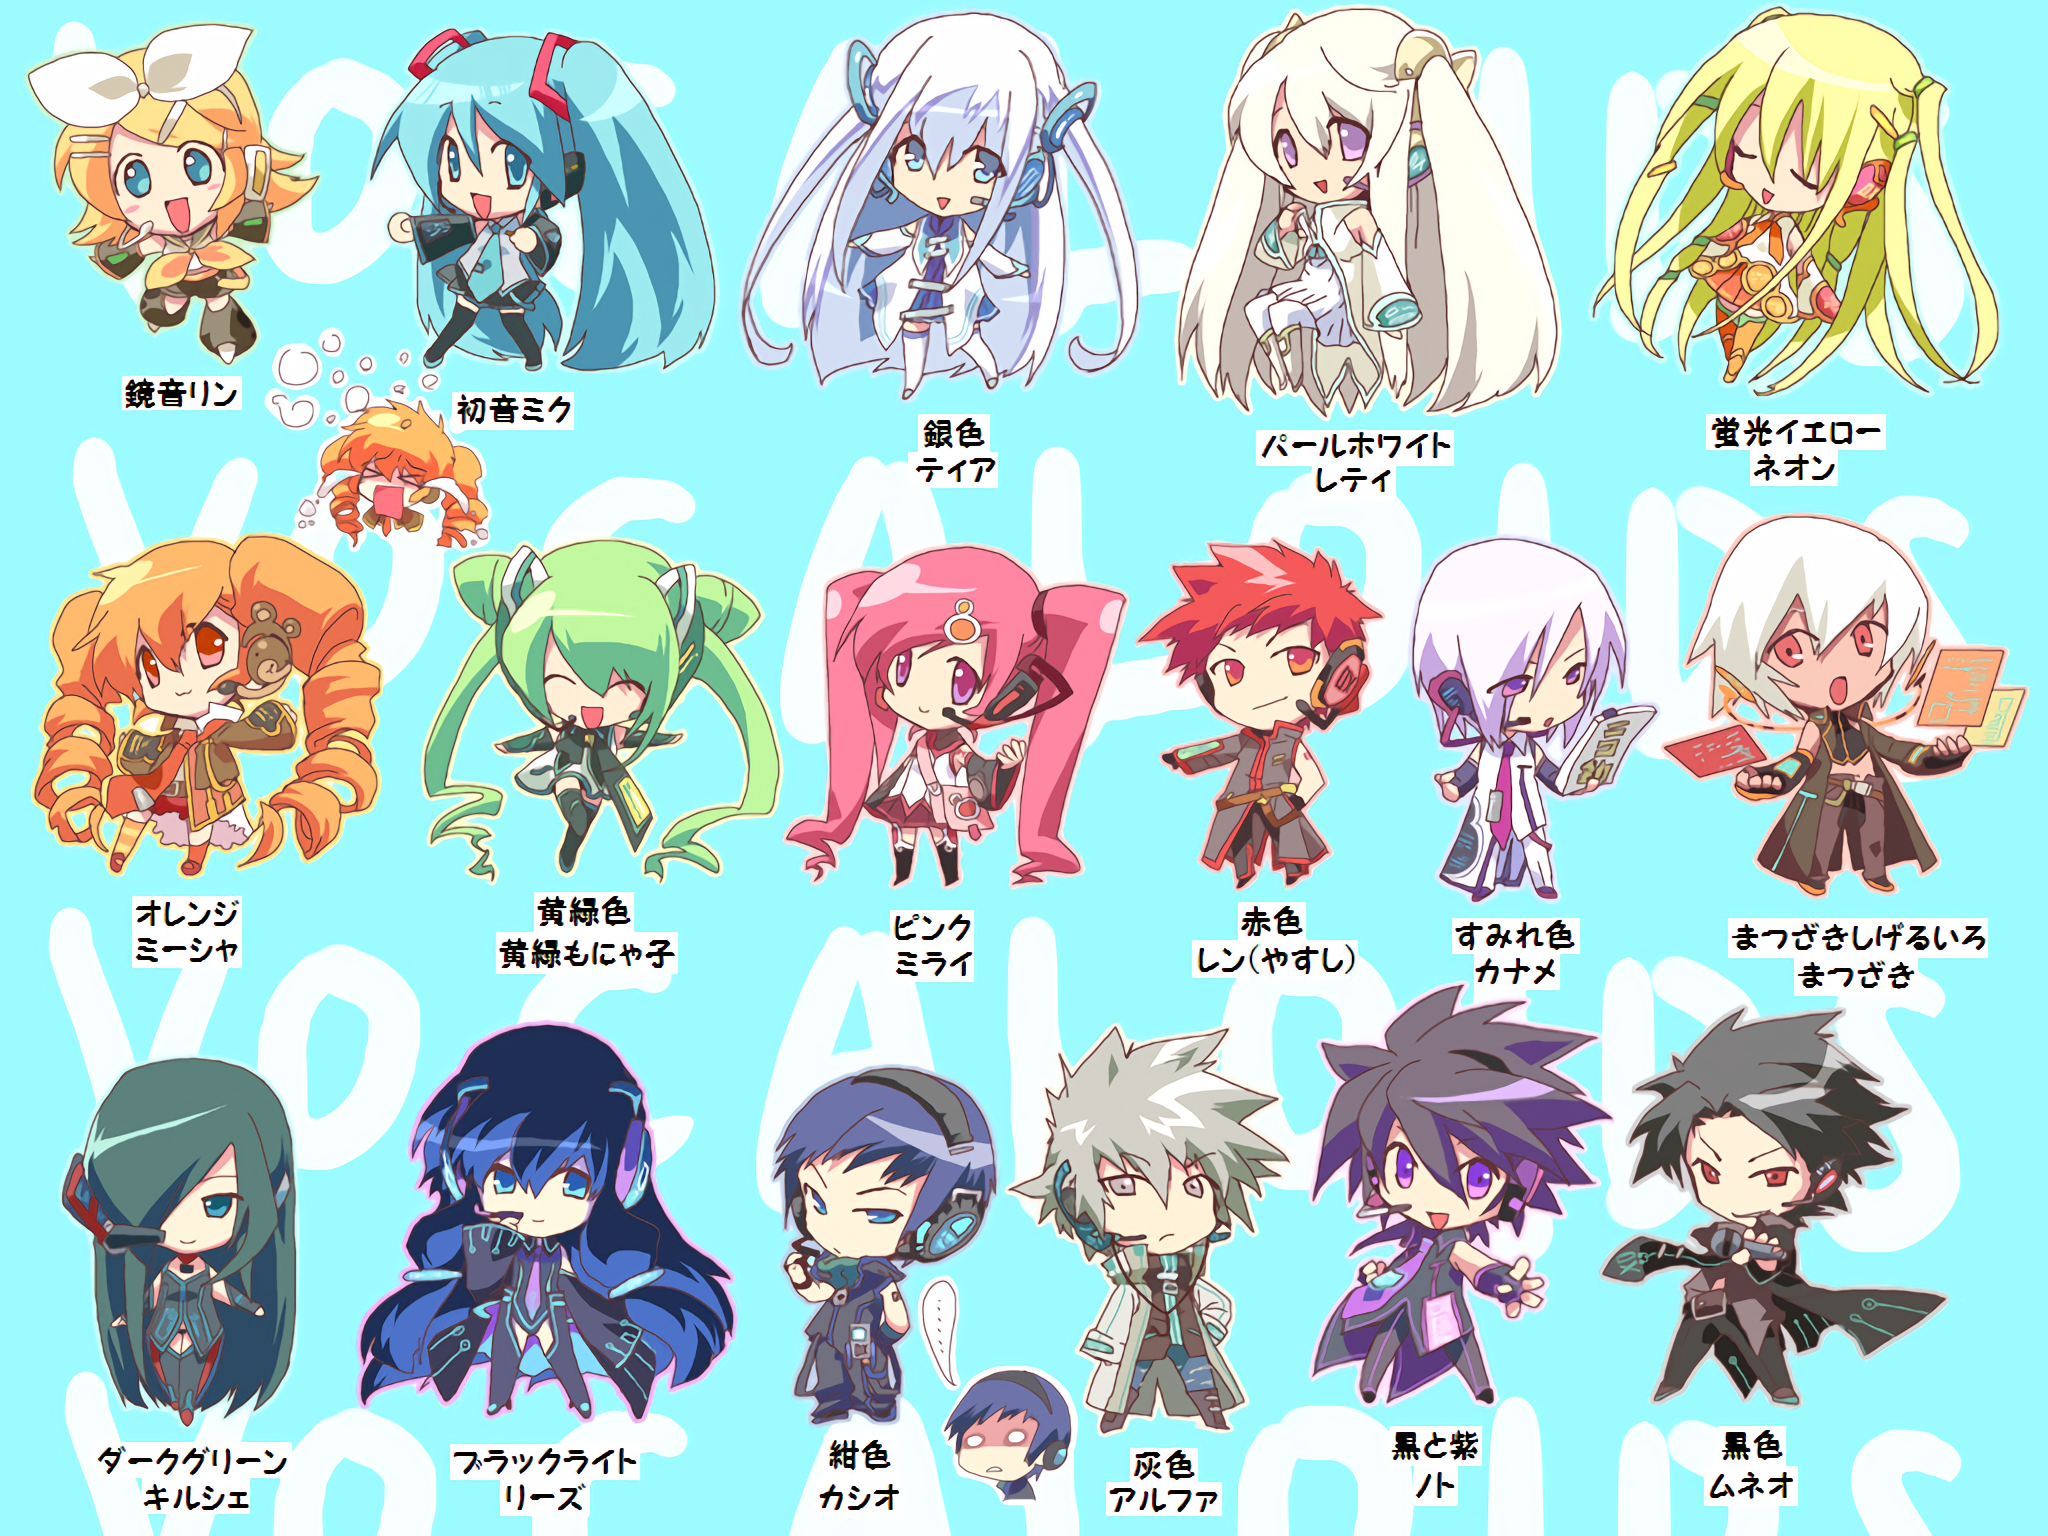 A collection of various chibi Vocaloid-like characters.